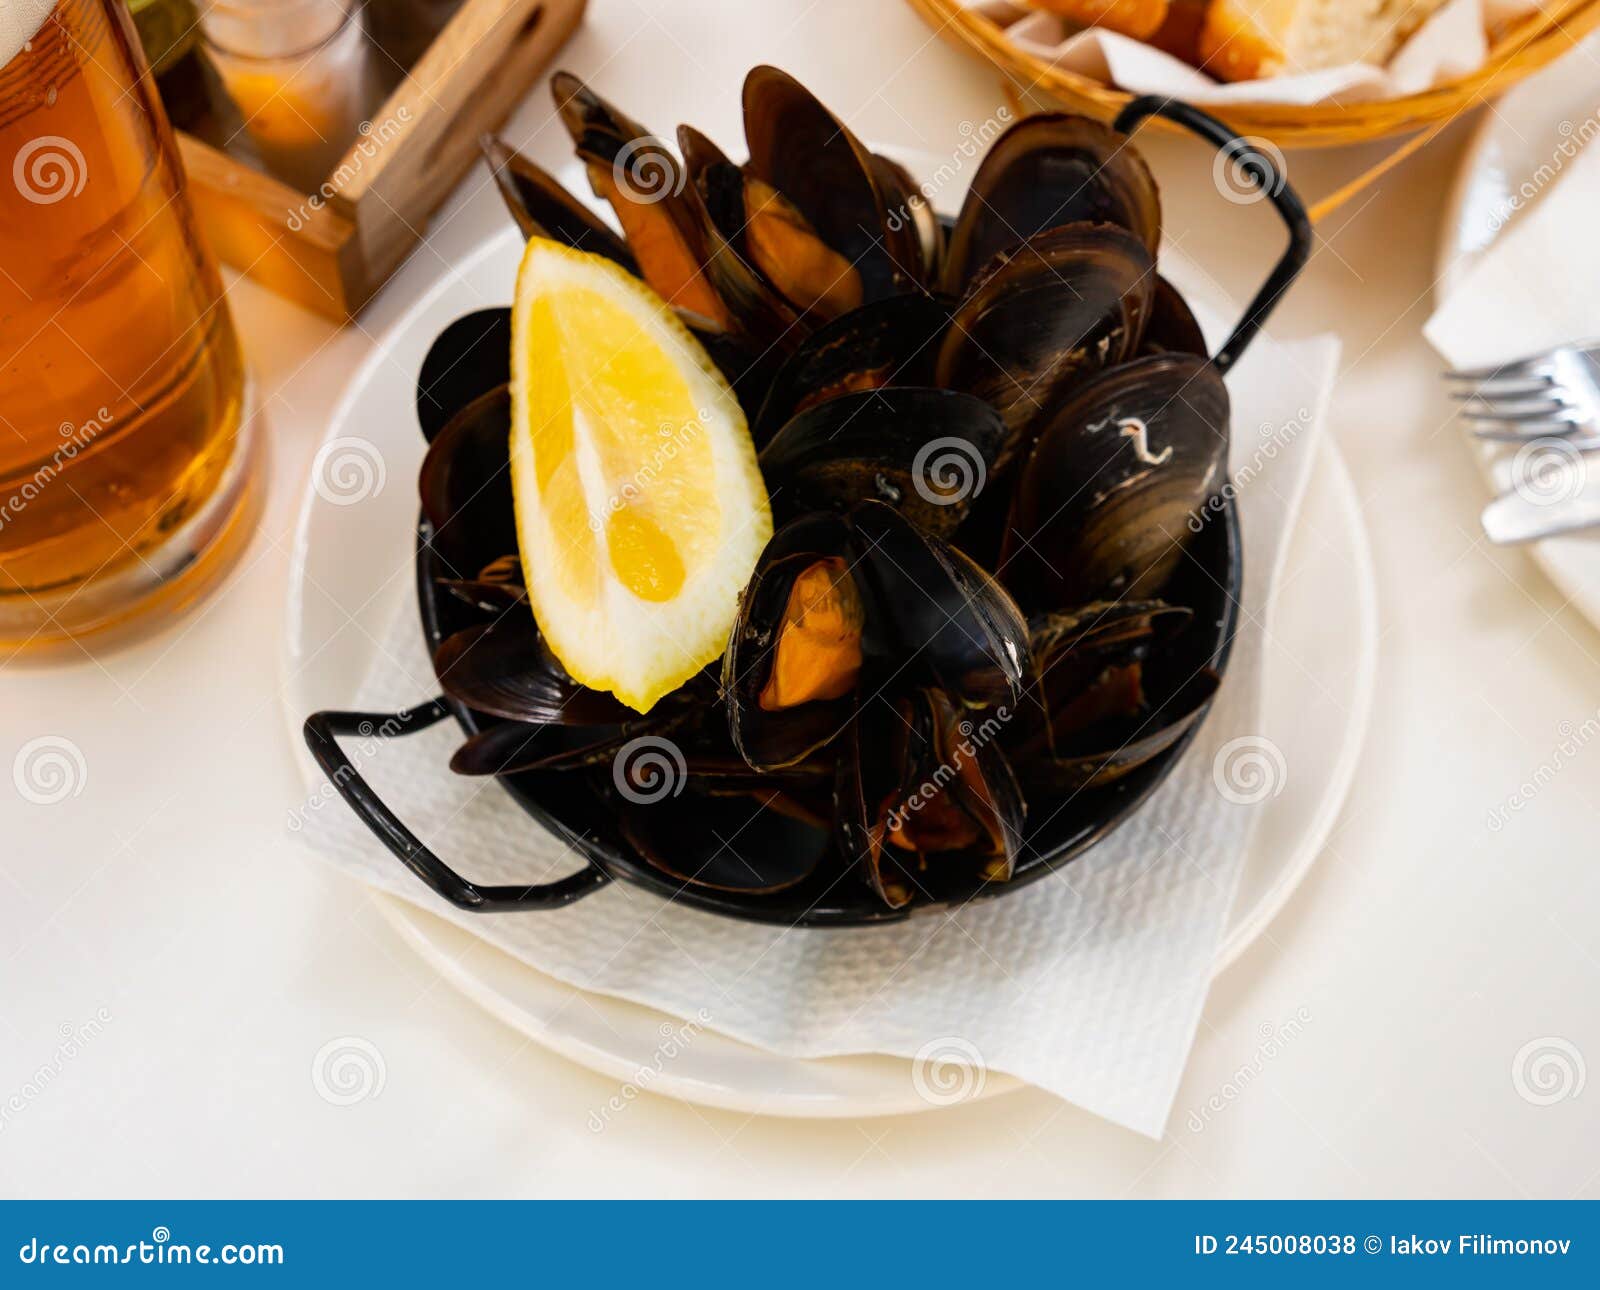 steamed mussel served with lemon